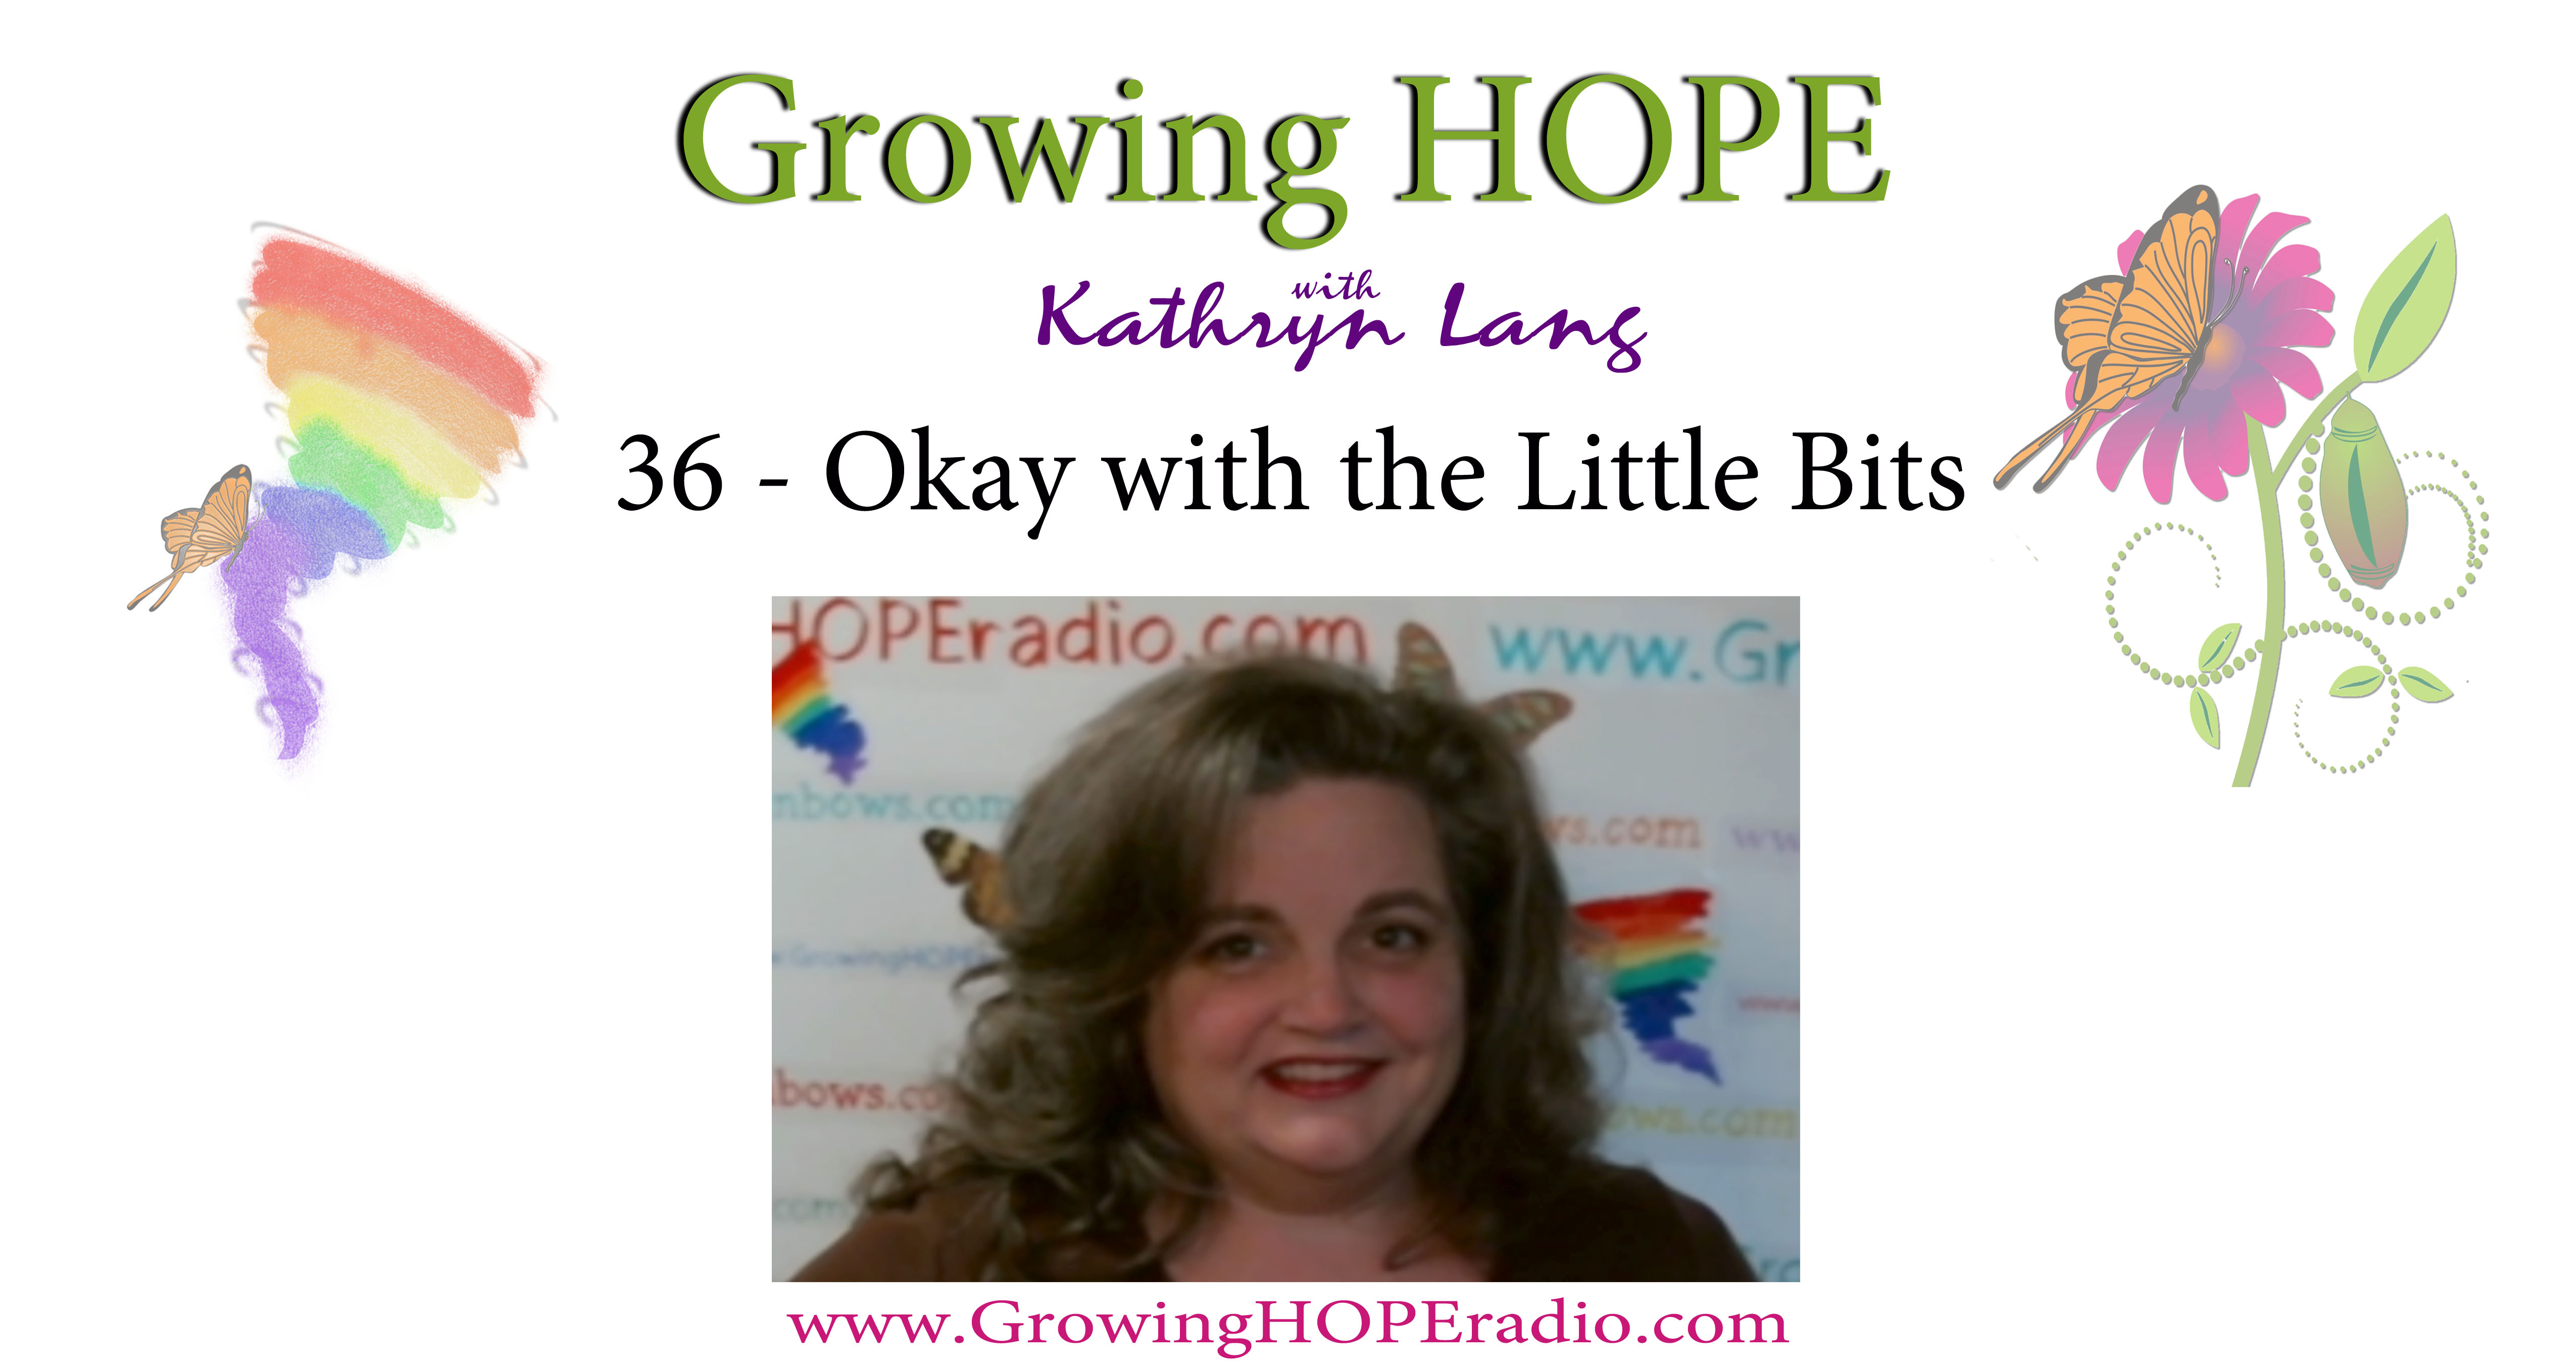 #GrowingHOPE Daily - 36 - okay with little bits